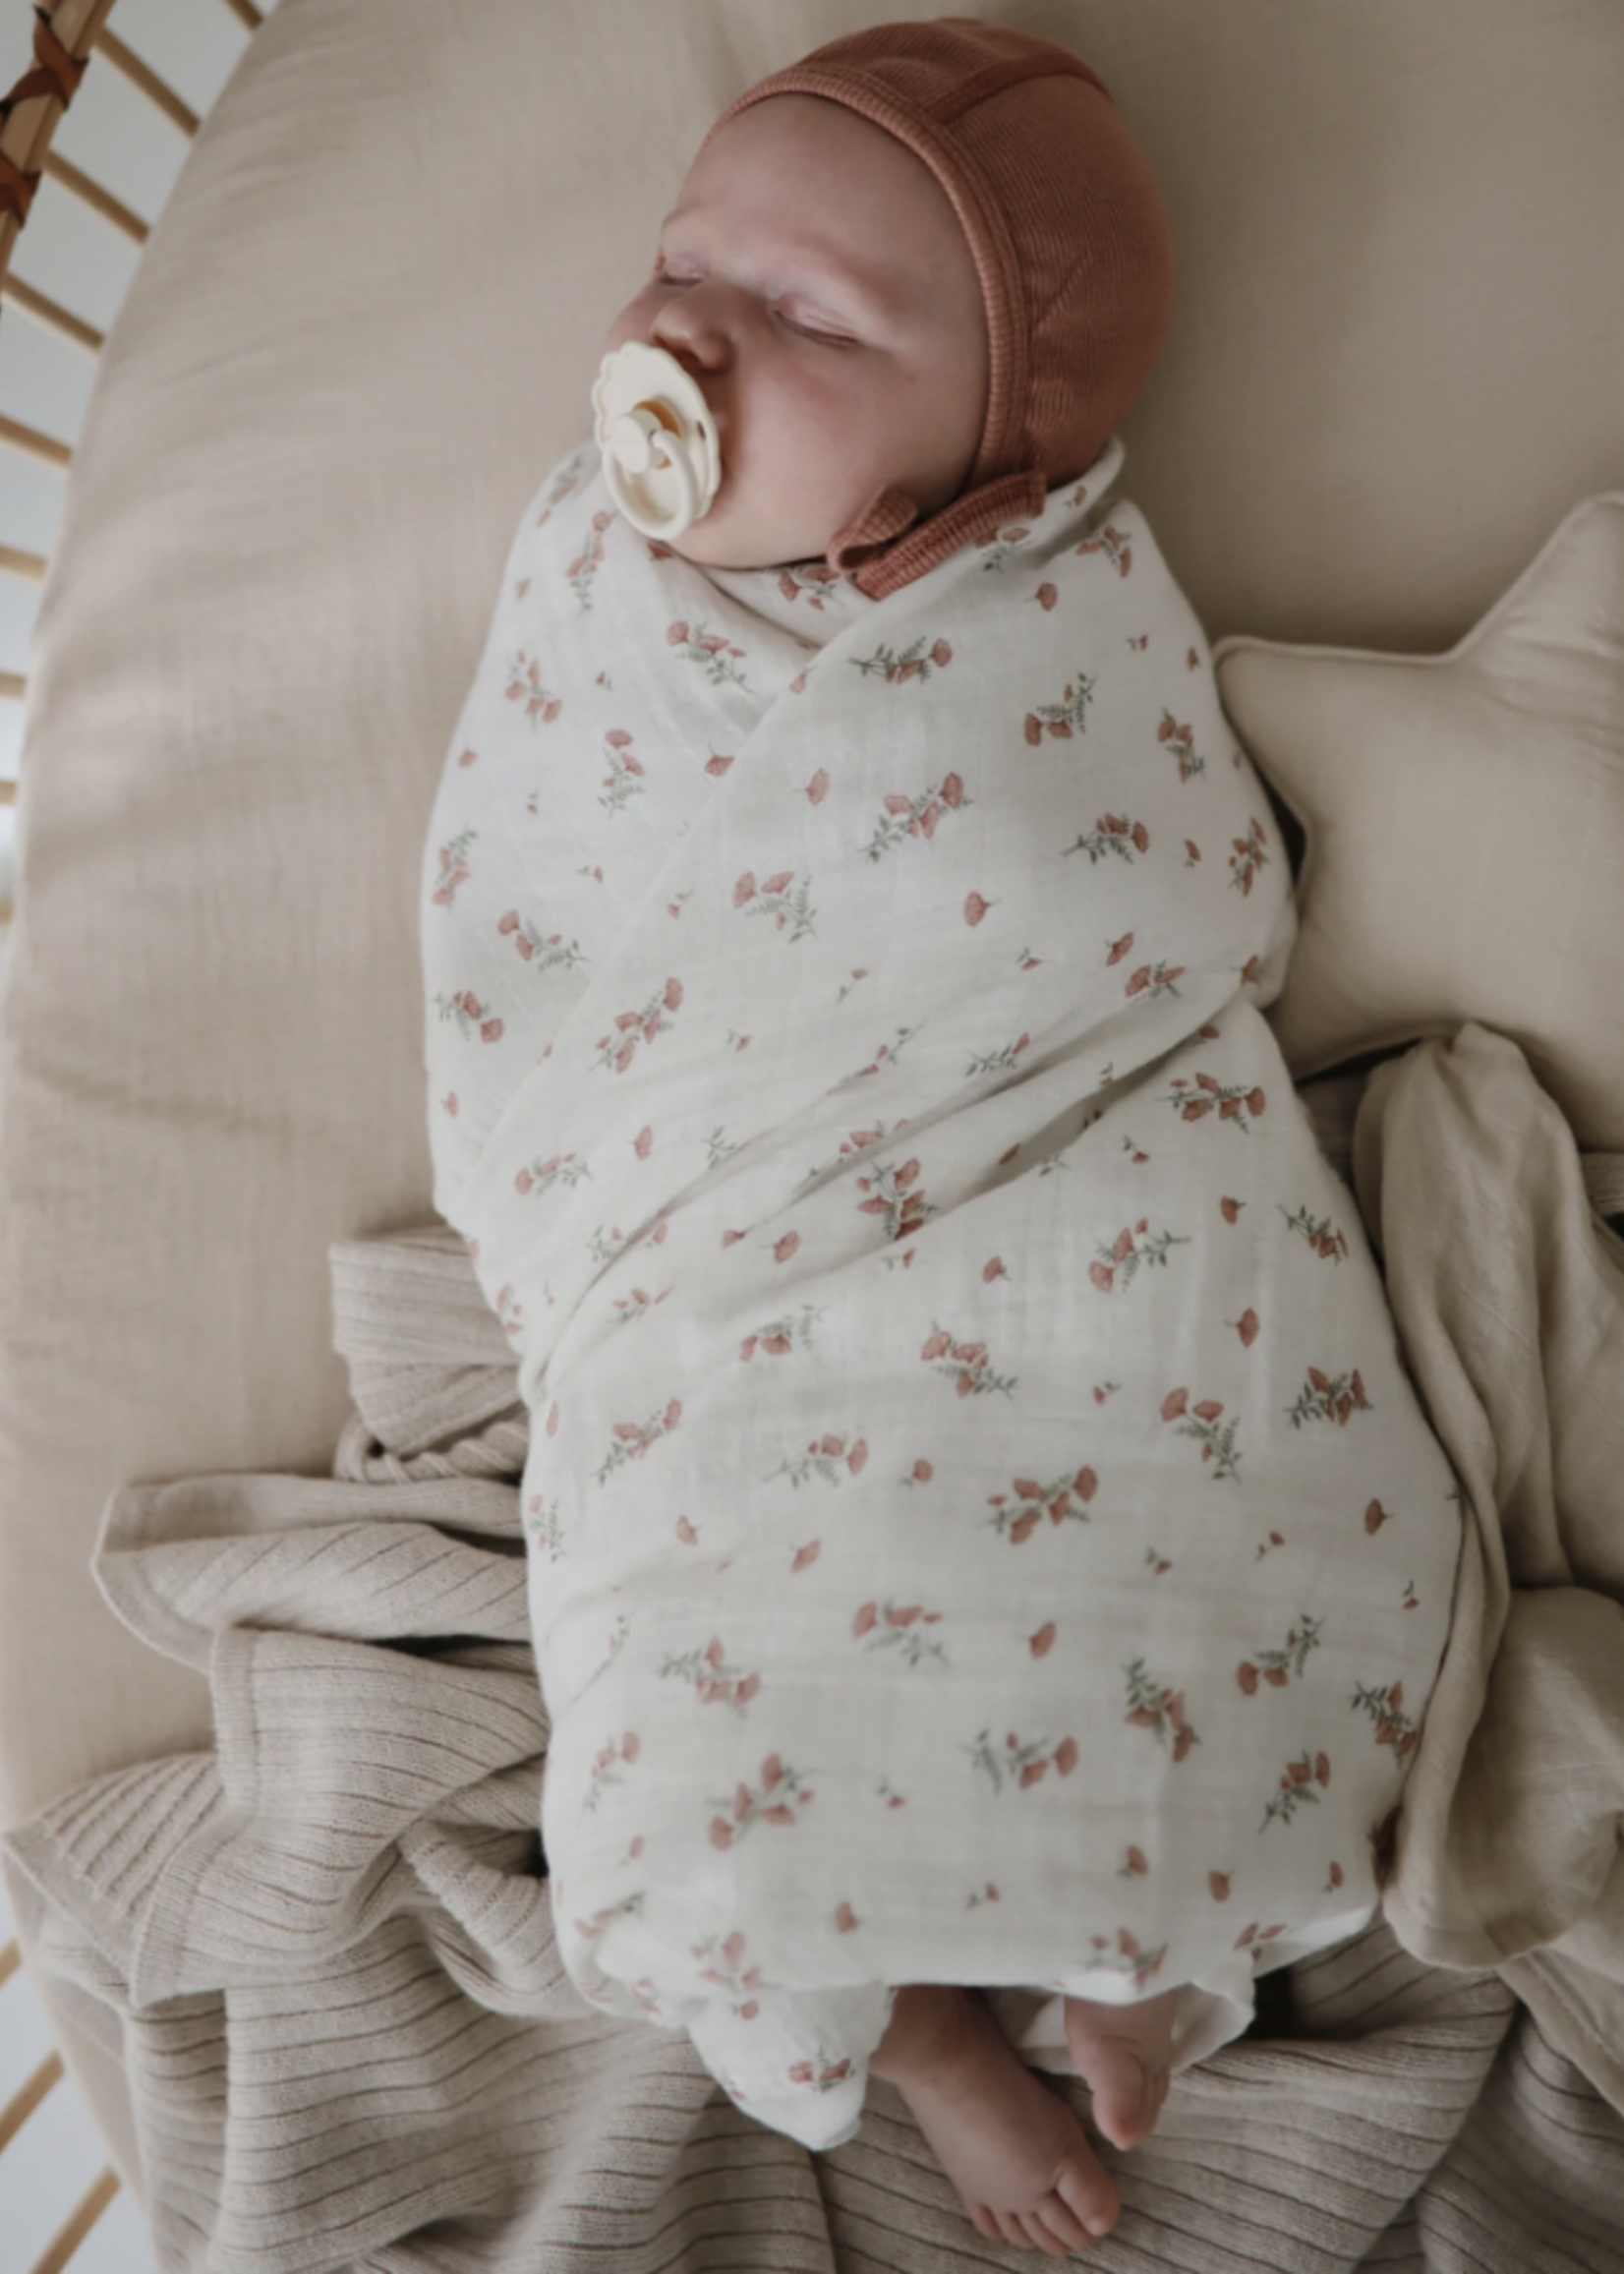 Elitaire Petite Muslin Organic Cotton Swaddle in Pink Flowers